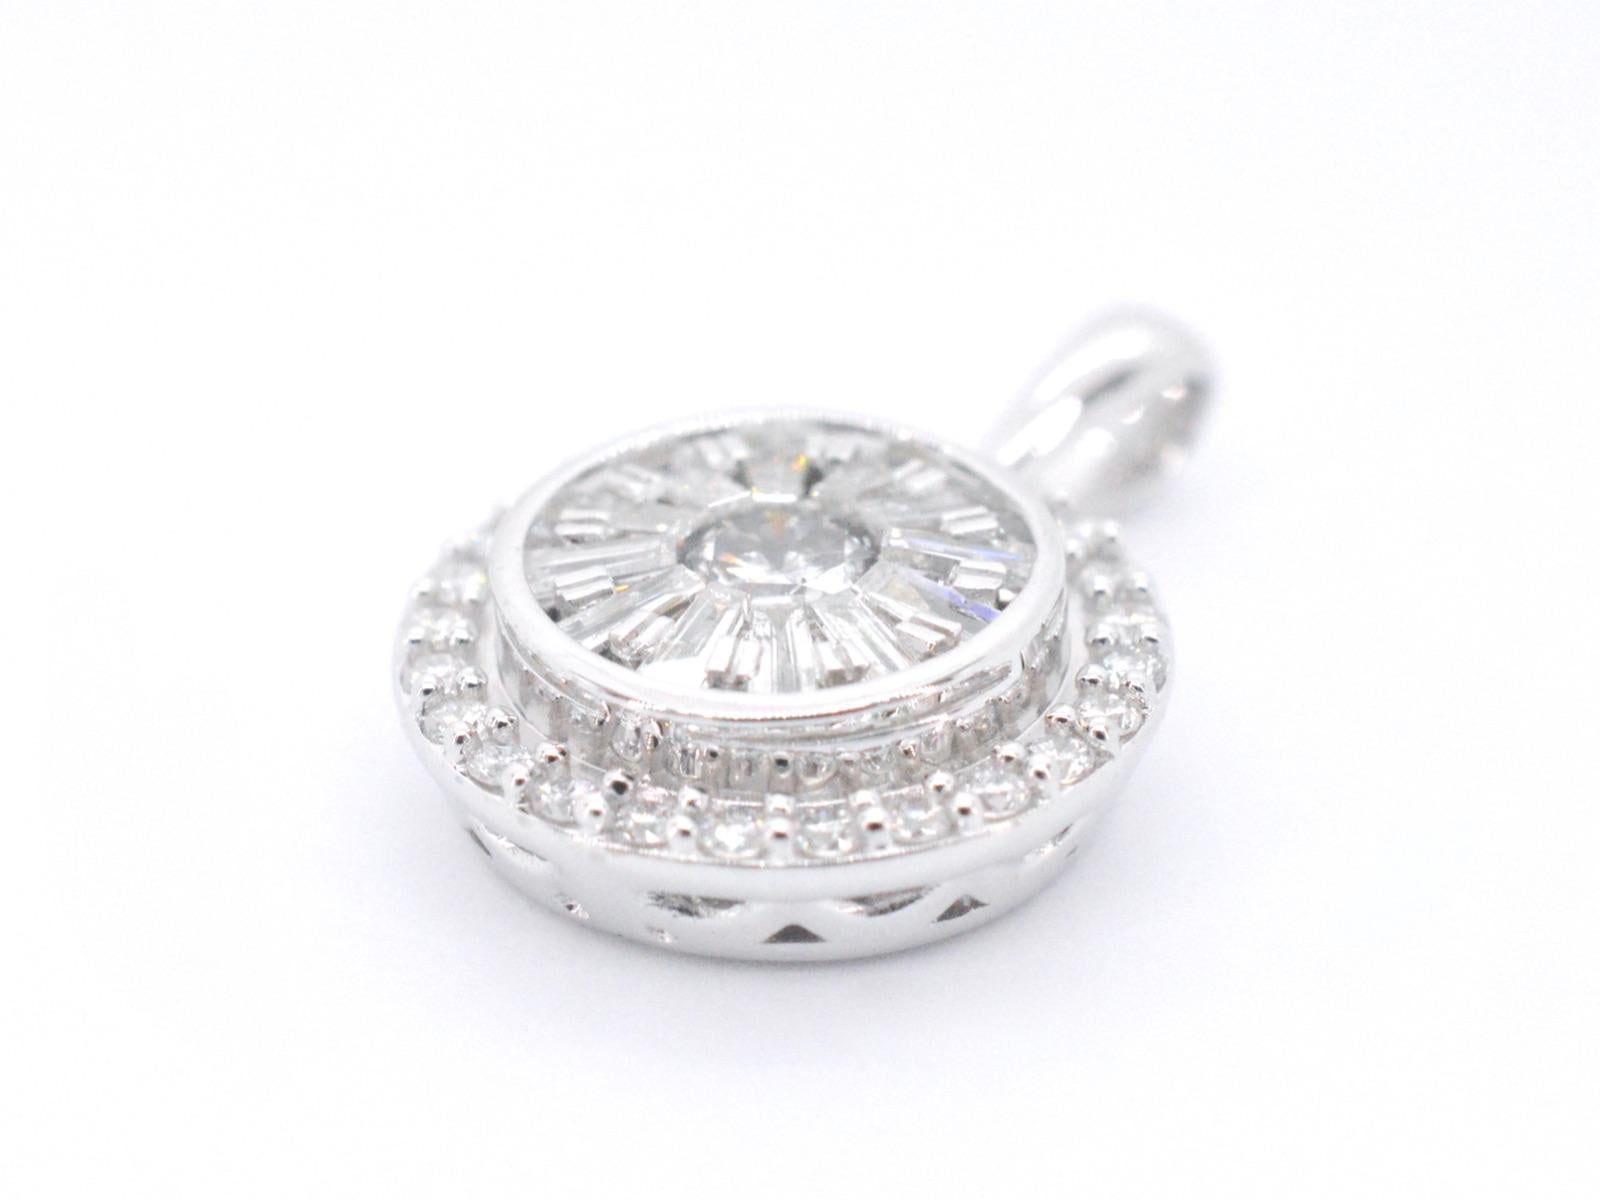 This stunning white gold pendant features a total of 0.75 carats of brilliant and baguette cut diamonds arranged in a classic round design. The diamonds are expertly set in a pave setting, creating a beautiful and seamless surface of sparkling gems.